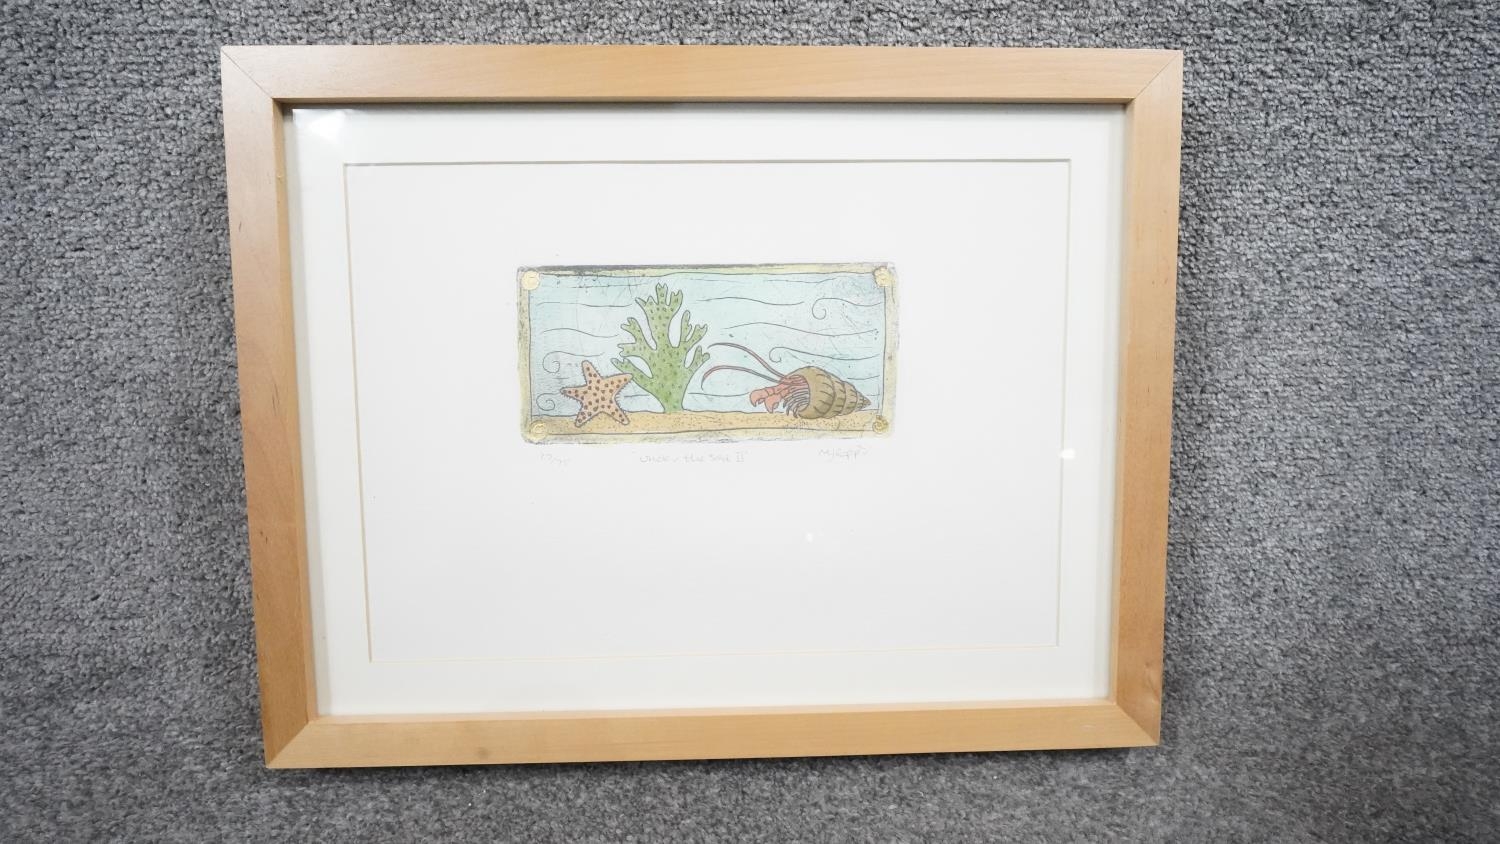 Two framed and glazed signed limited edition sea life prints signed M. J. Epps. One of a starfish - Image 5 of 8